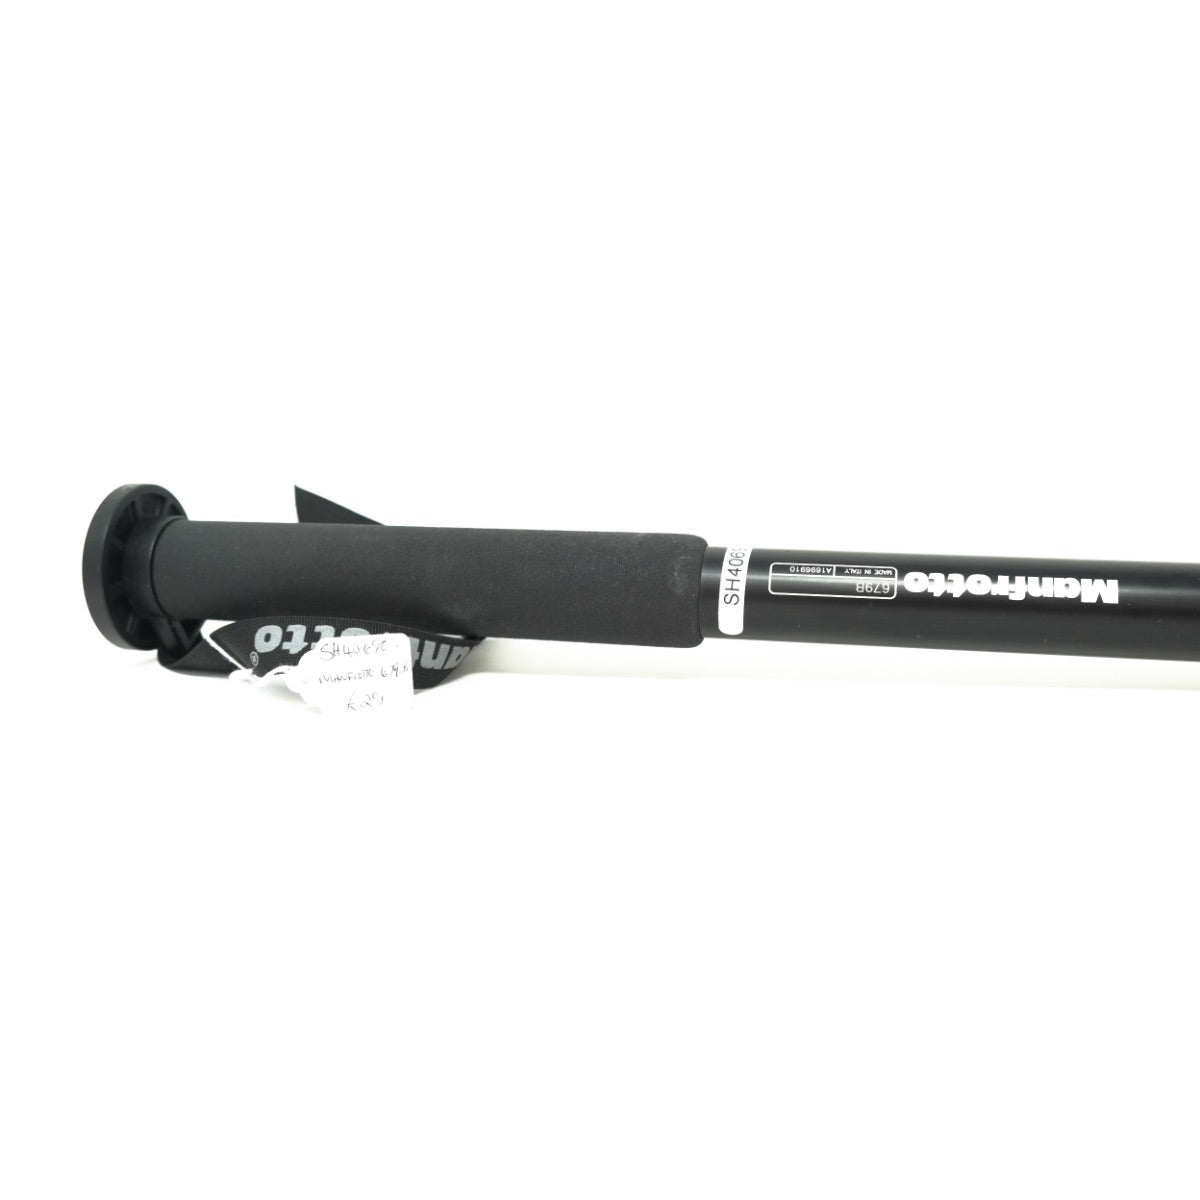 Used Manfrotto Monopod